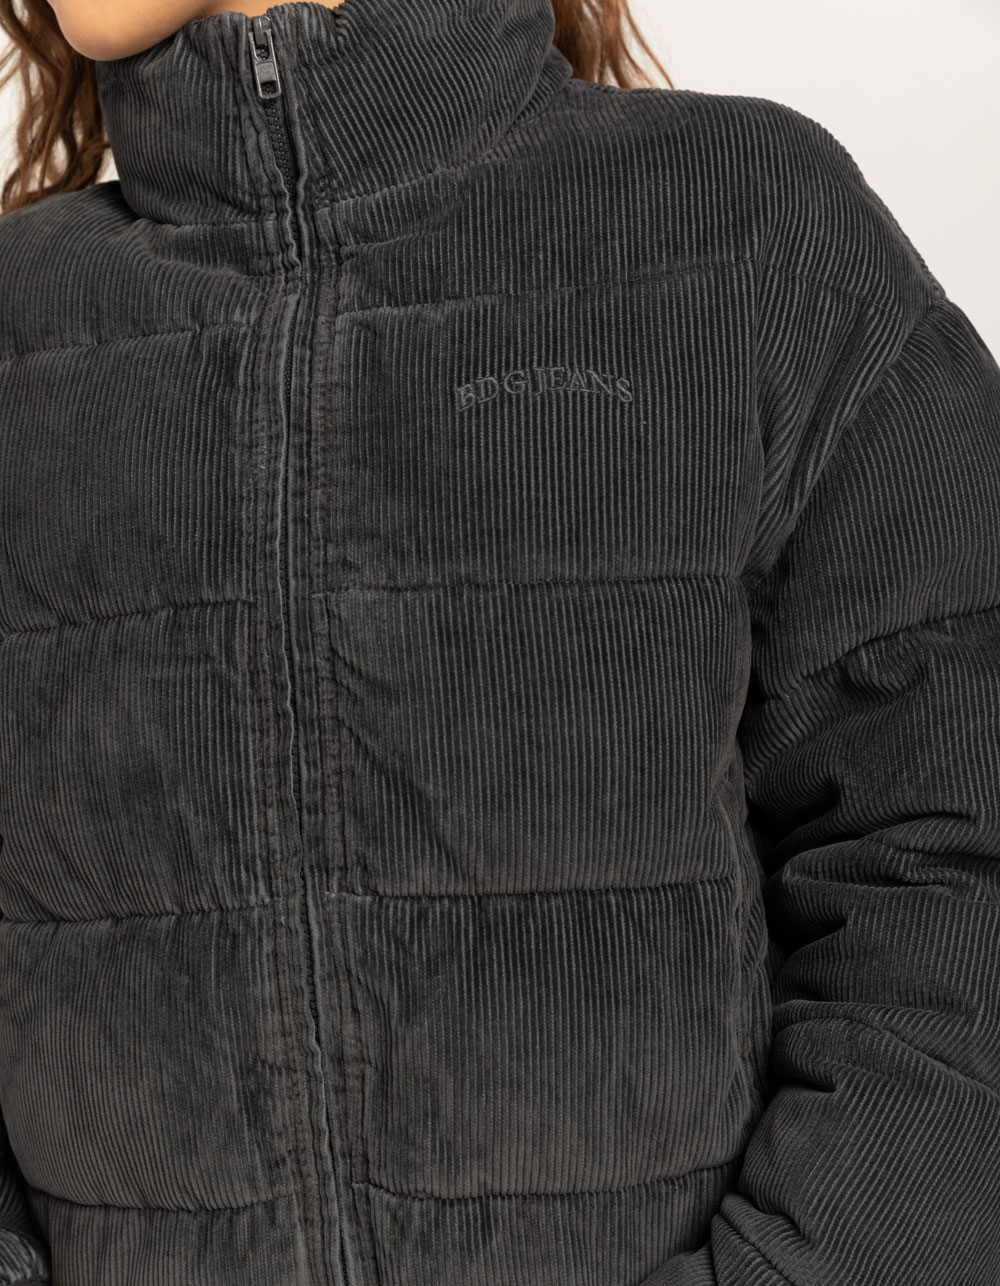 Urban Donna Jacket | Outfitters WASHED BLACK Tillys Corduroy - BDG Womens Puffer